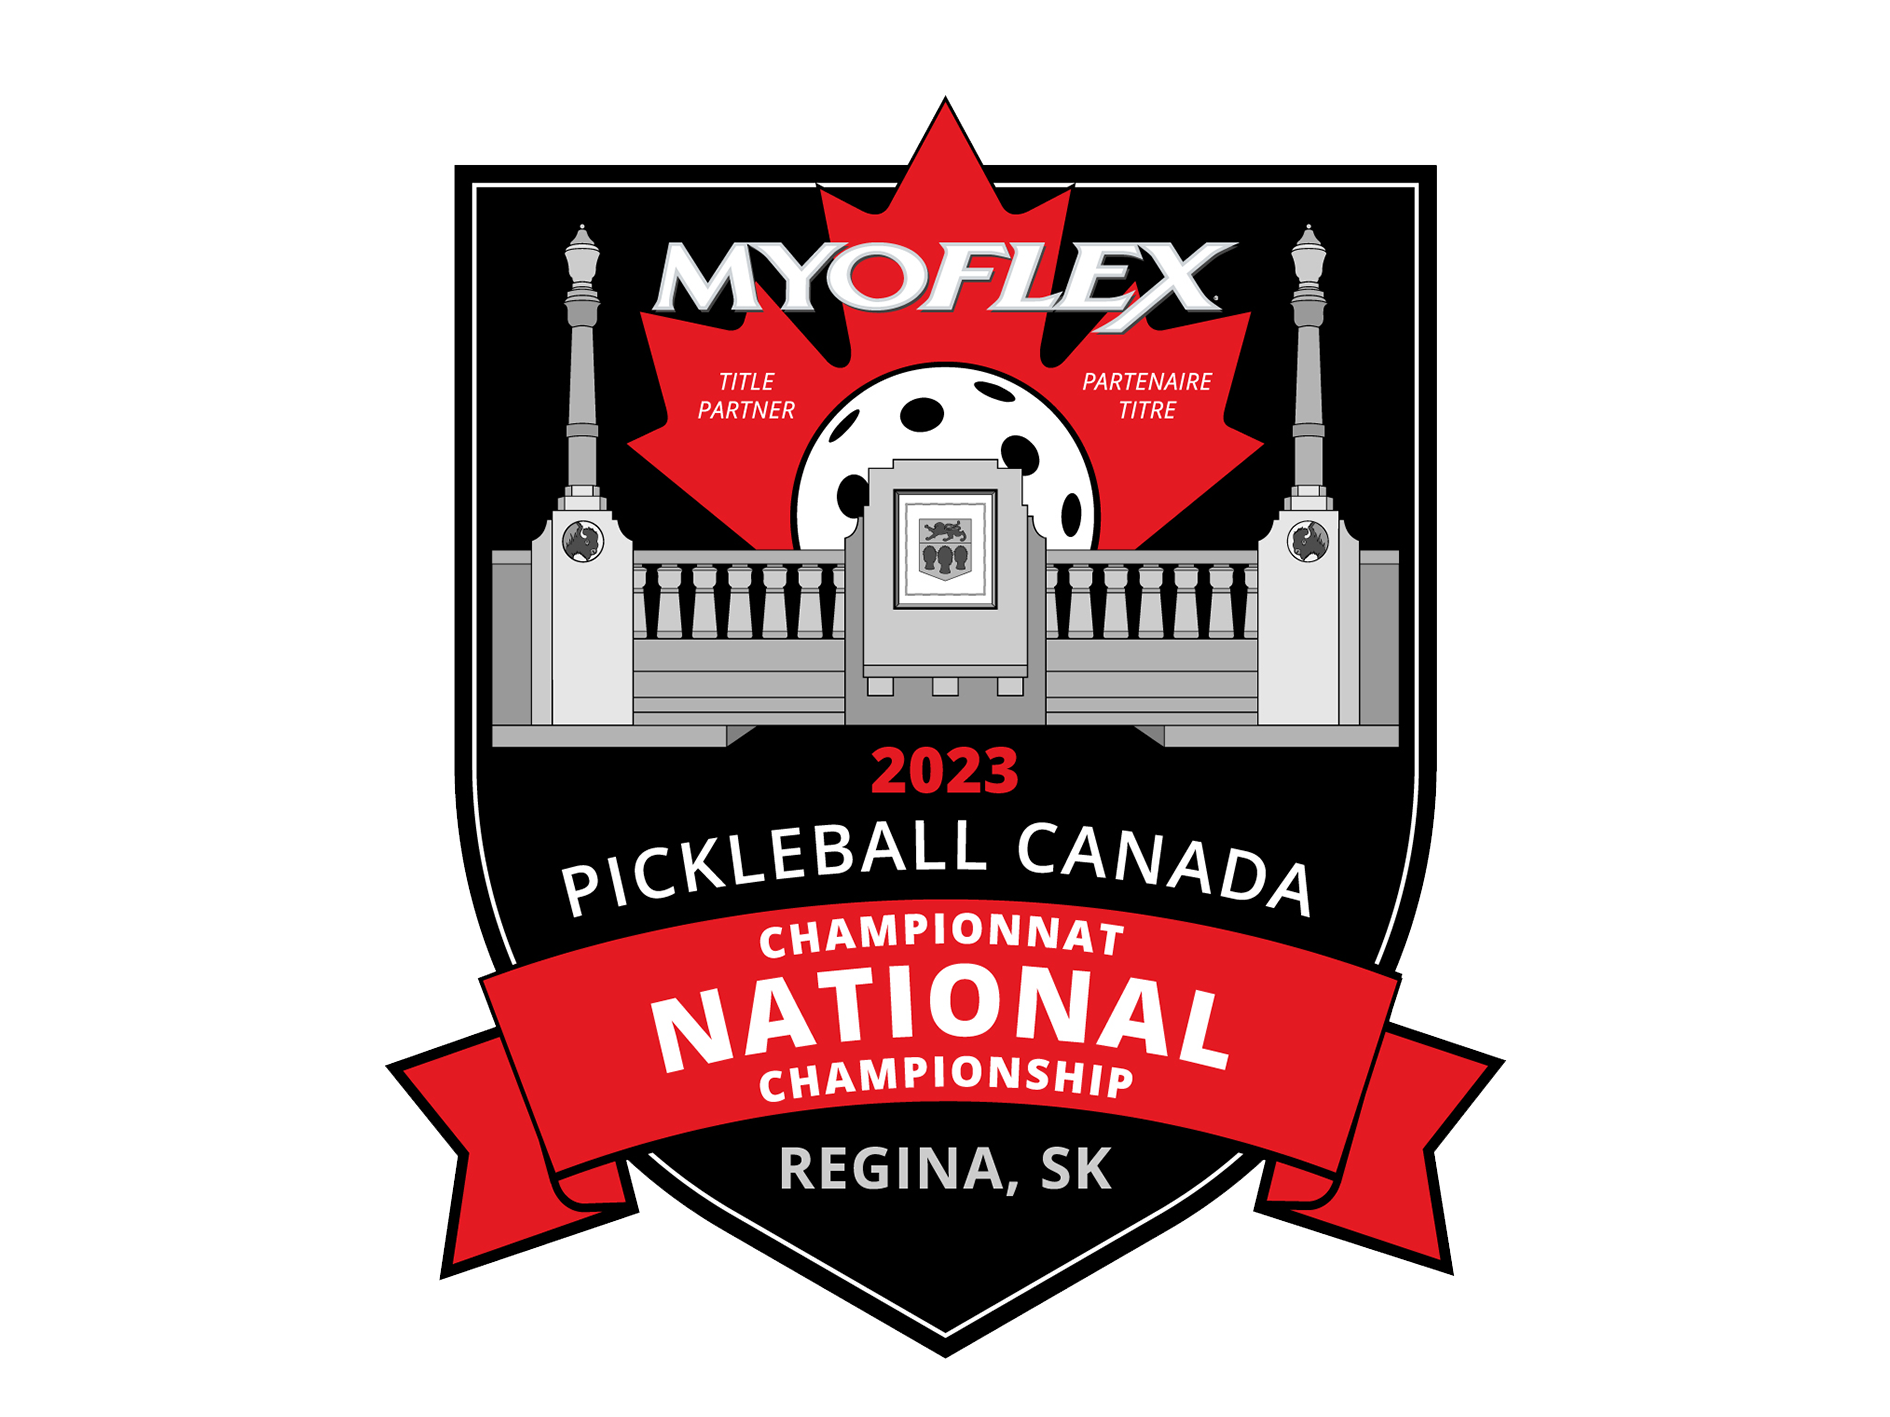 Myoflex® unveiled as title partner of National Championships!